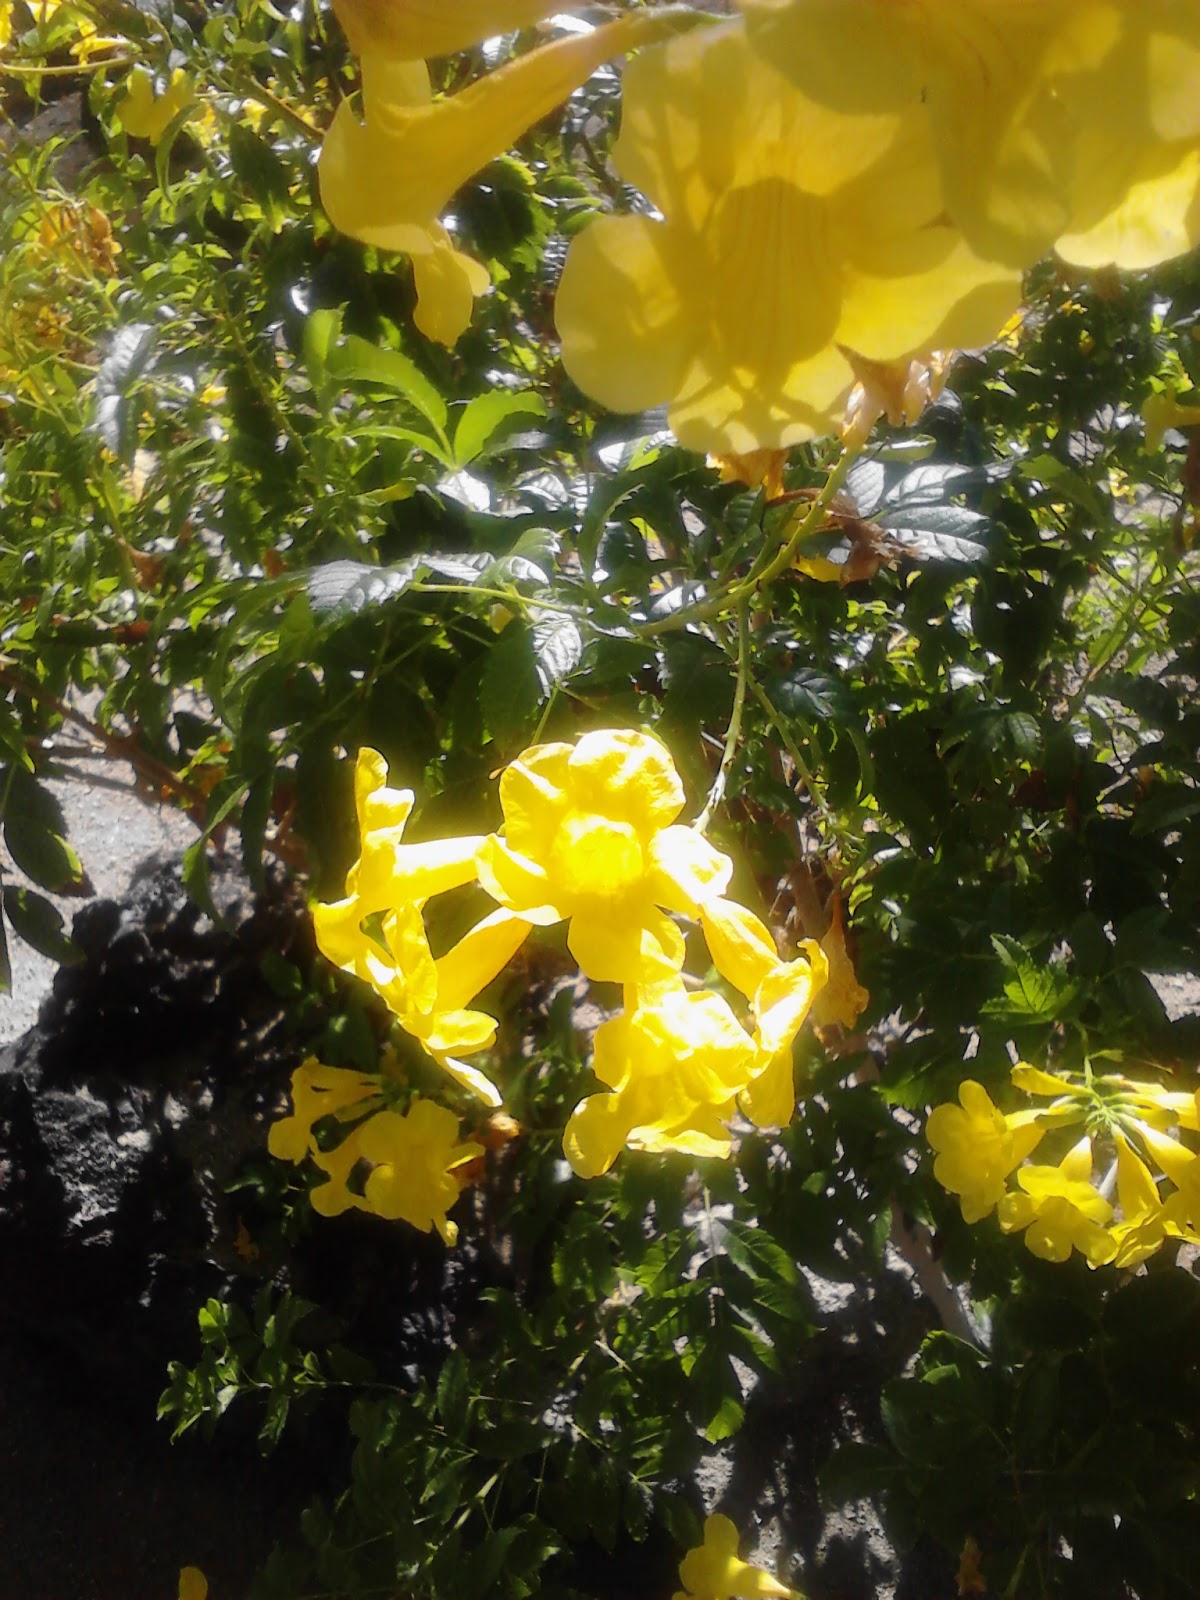 Xtremehorticulture of the Desert: Taking Care of Yellow Bells